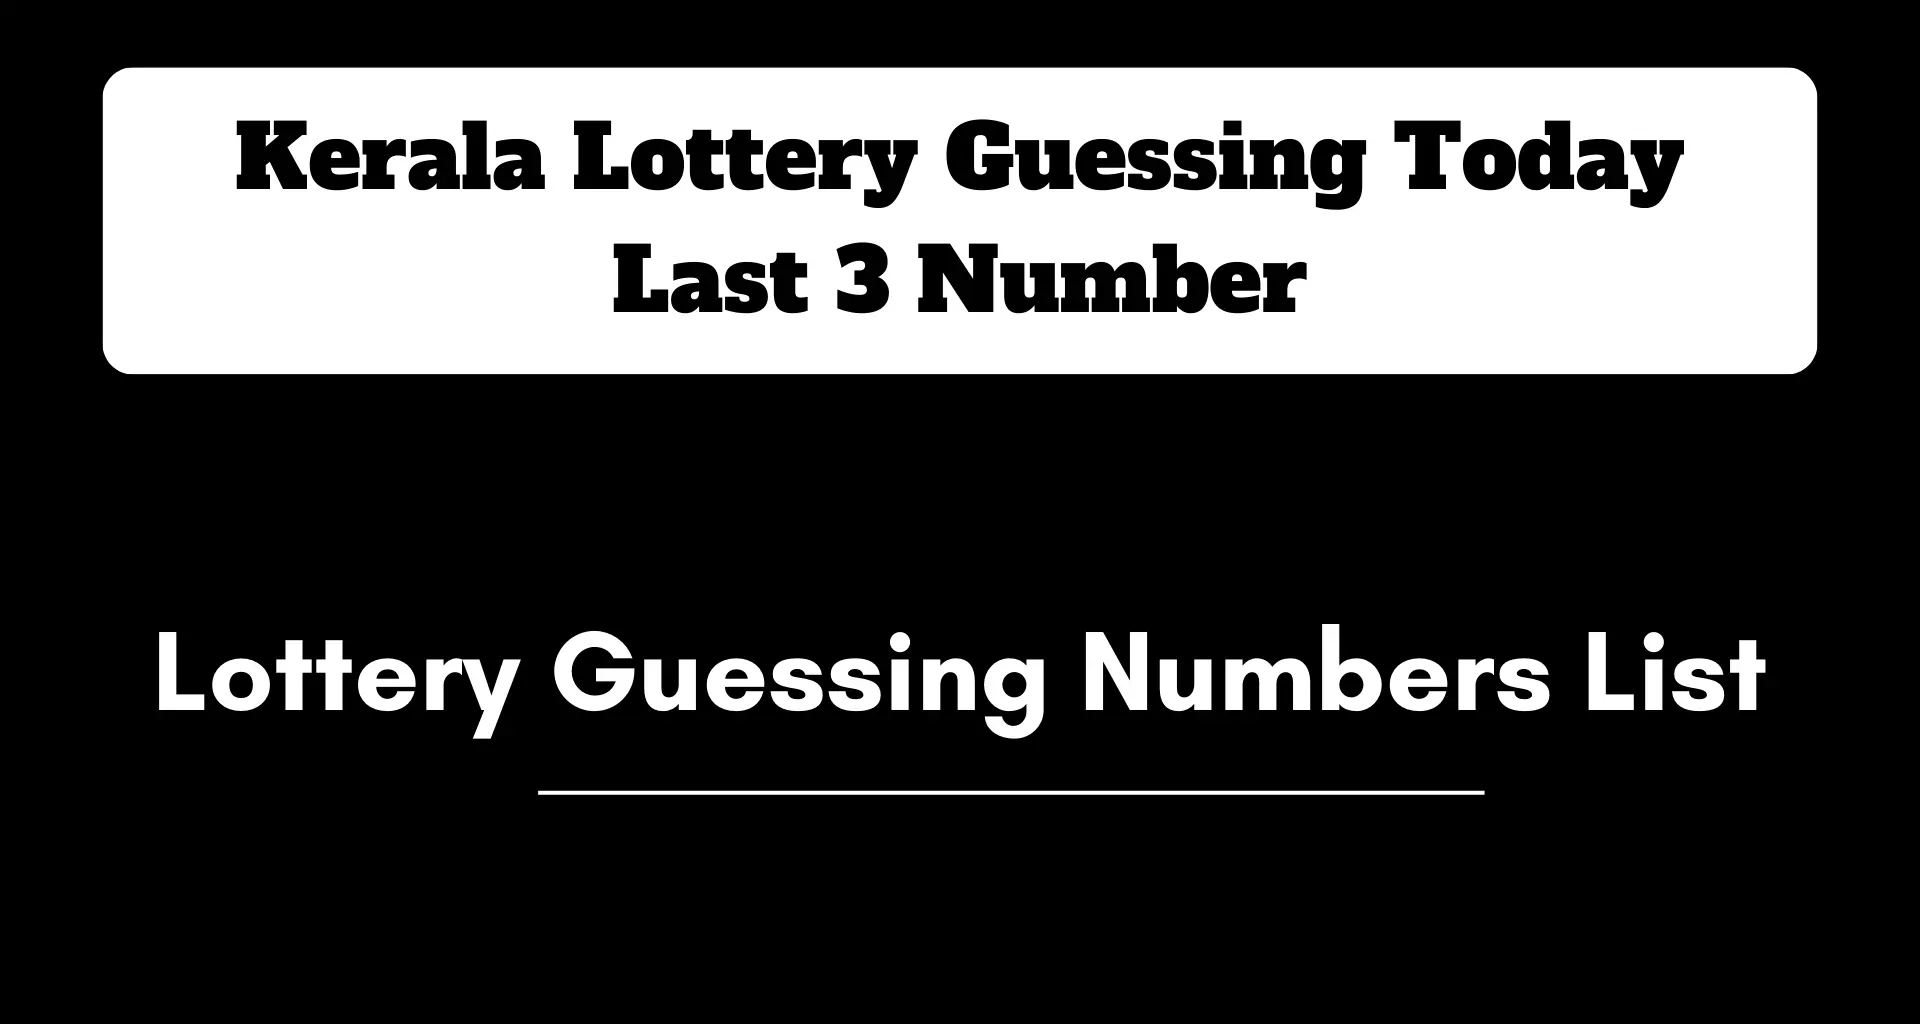 Kerala Lottery Guessing Today Last 3 Number